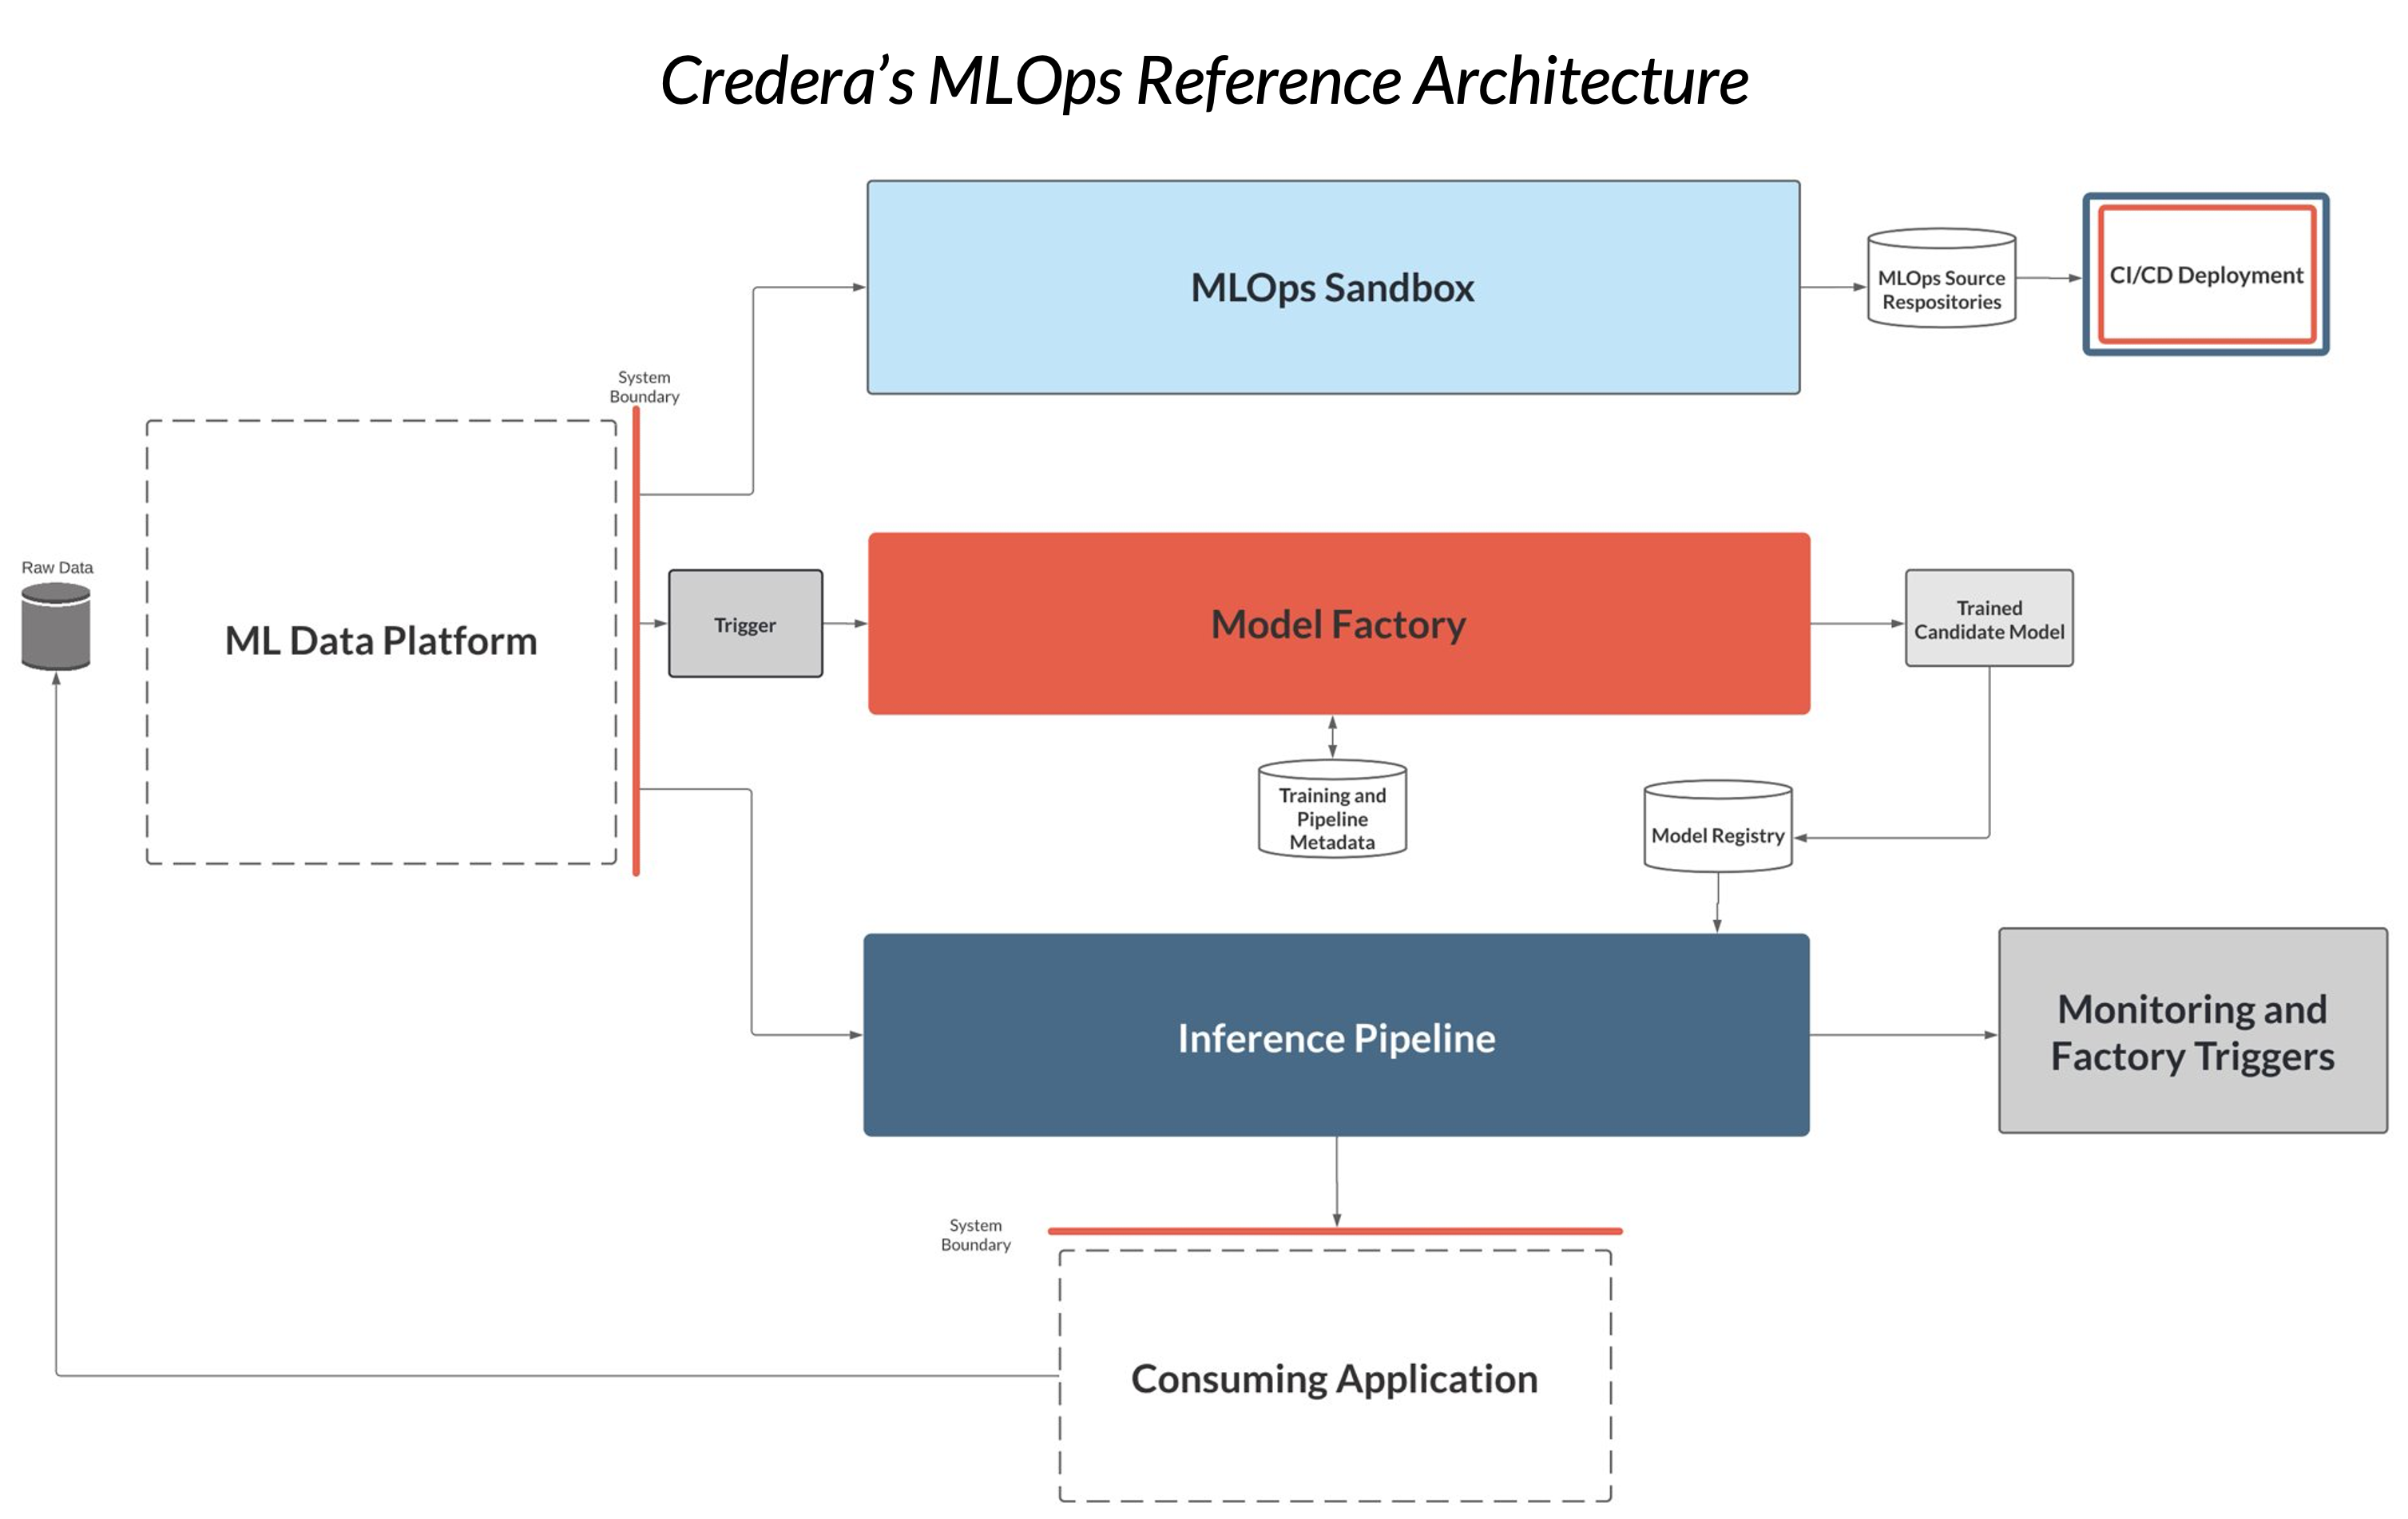 Credera’s MLOps Reference Architecture